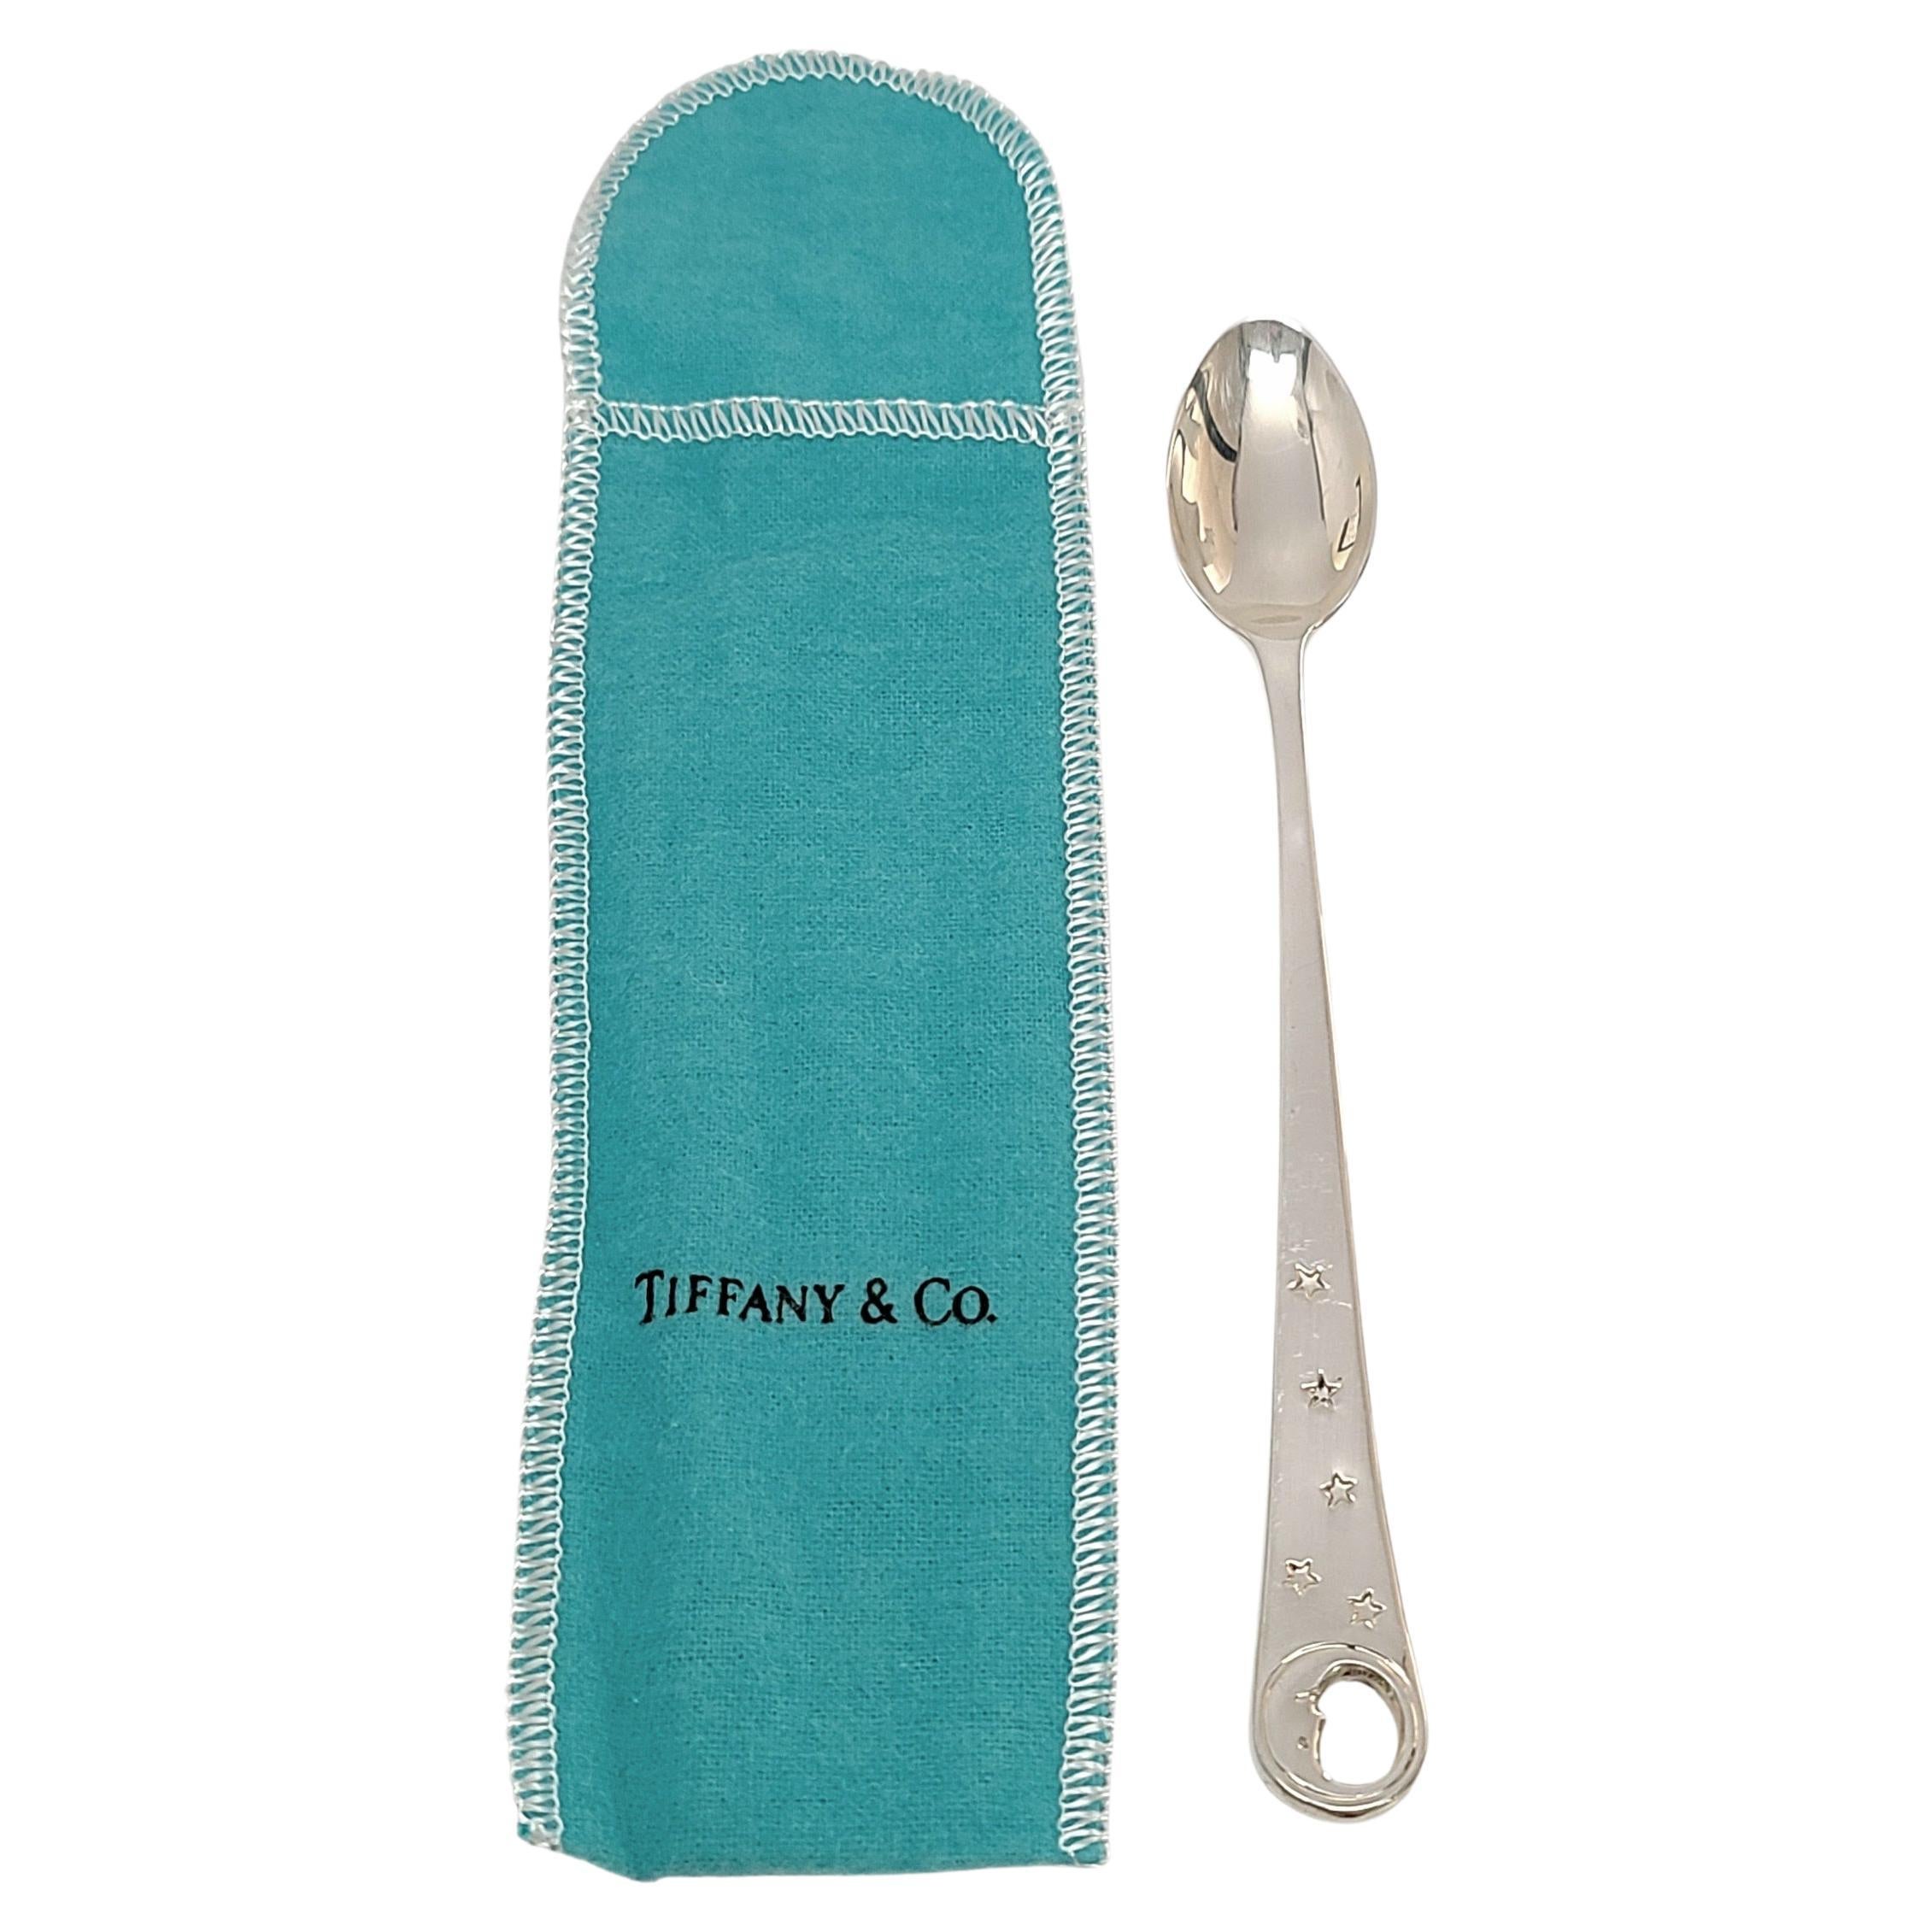 https://a.1stdibscdn.com/tiffany-co-sterling-silver-man-in-the-moon-baby-feeding-spoon-with-pouch-for-sale/j_12103/j_133318911631724651315/j_13331891_1631724652212_bg_processed.jpg